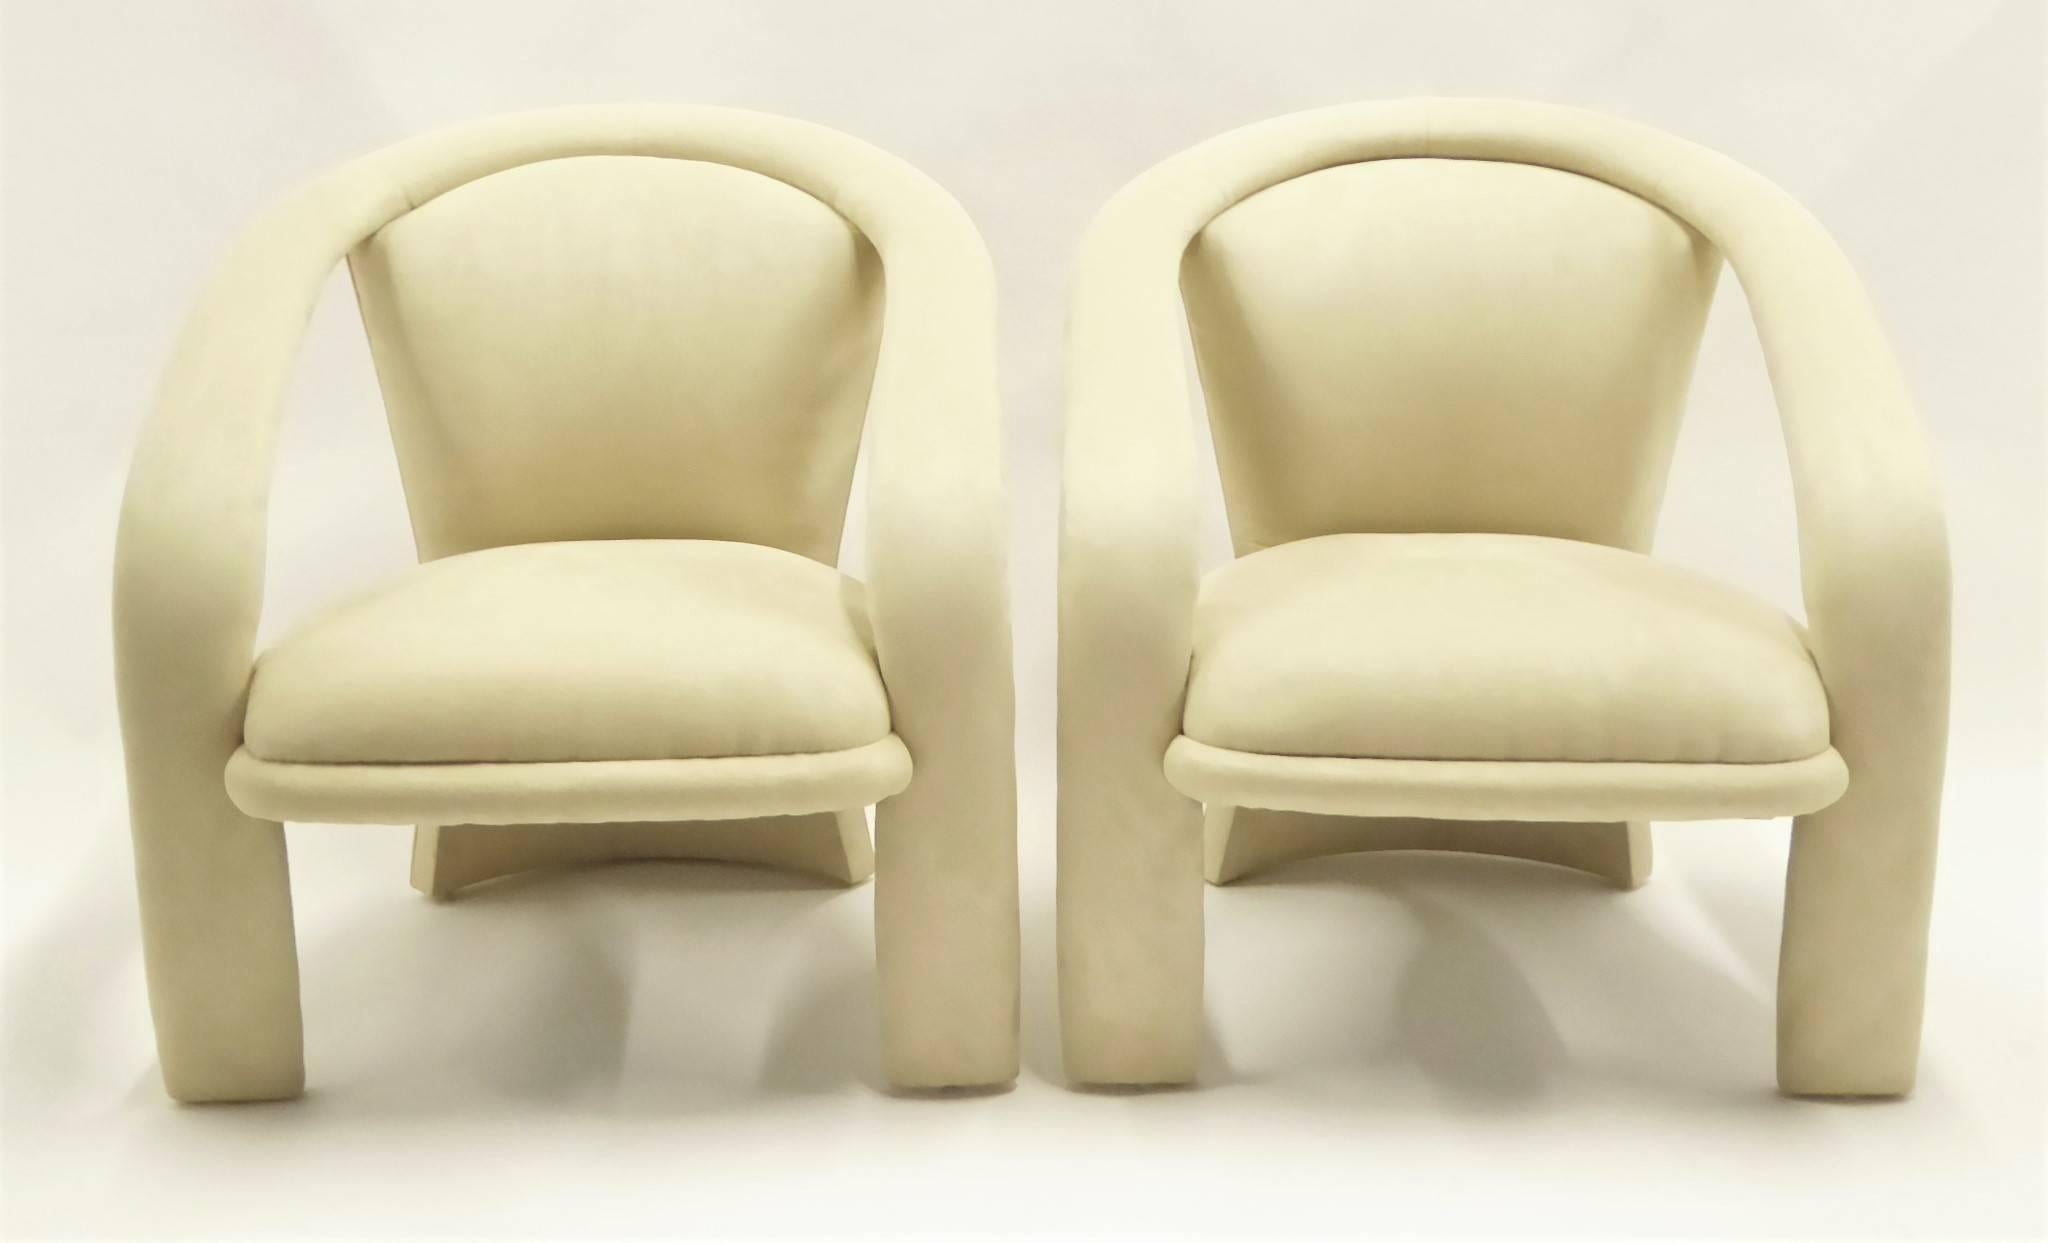 American Modern Pop Lounge Chairs by Carsons in Ultrasuede